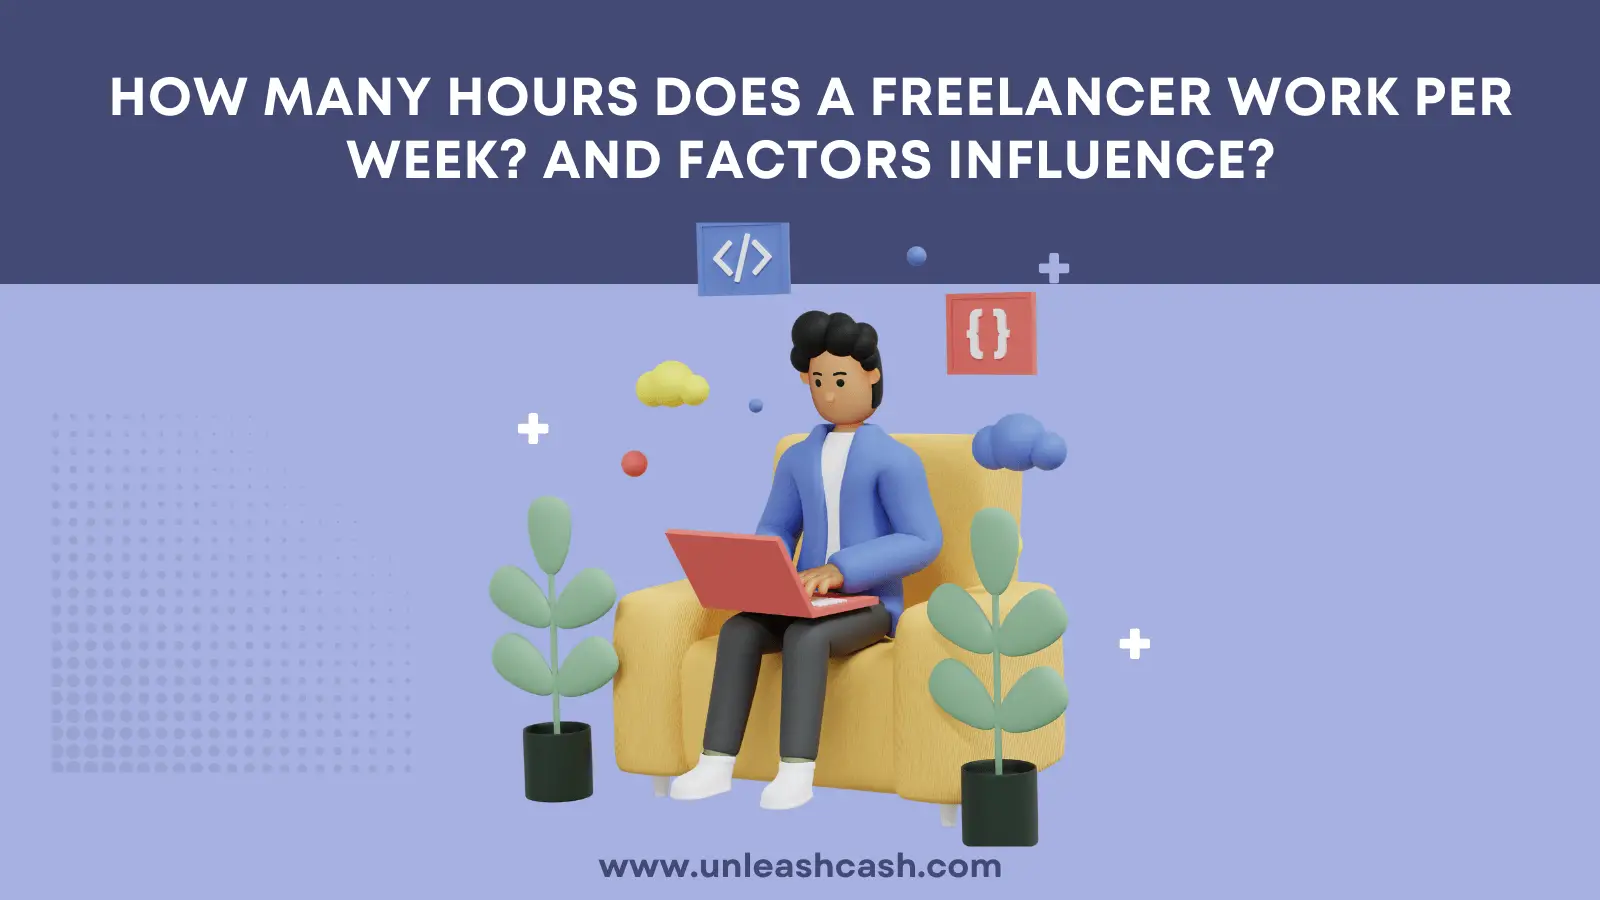 How Many Hours Does A Freelancer Work Per Week? And Factors Influence?